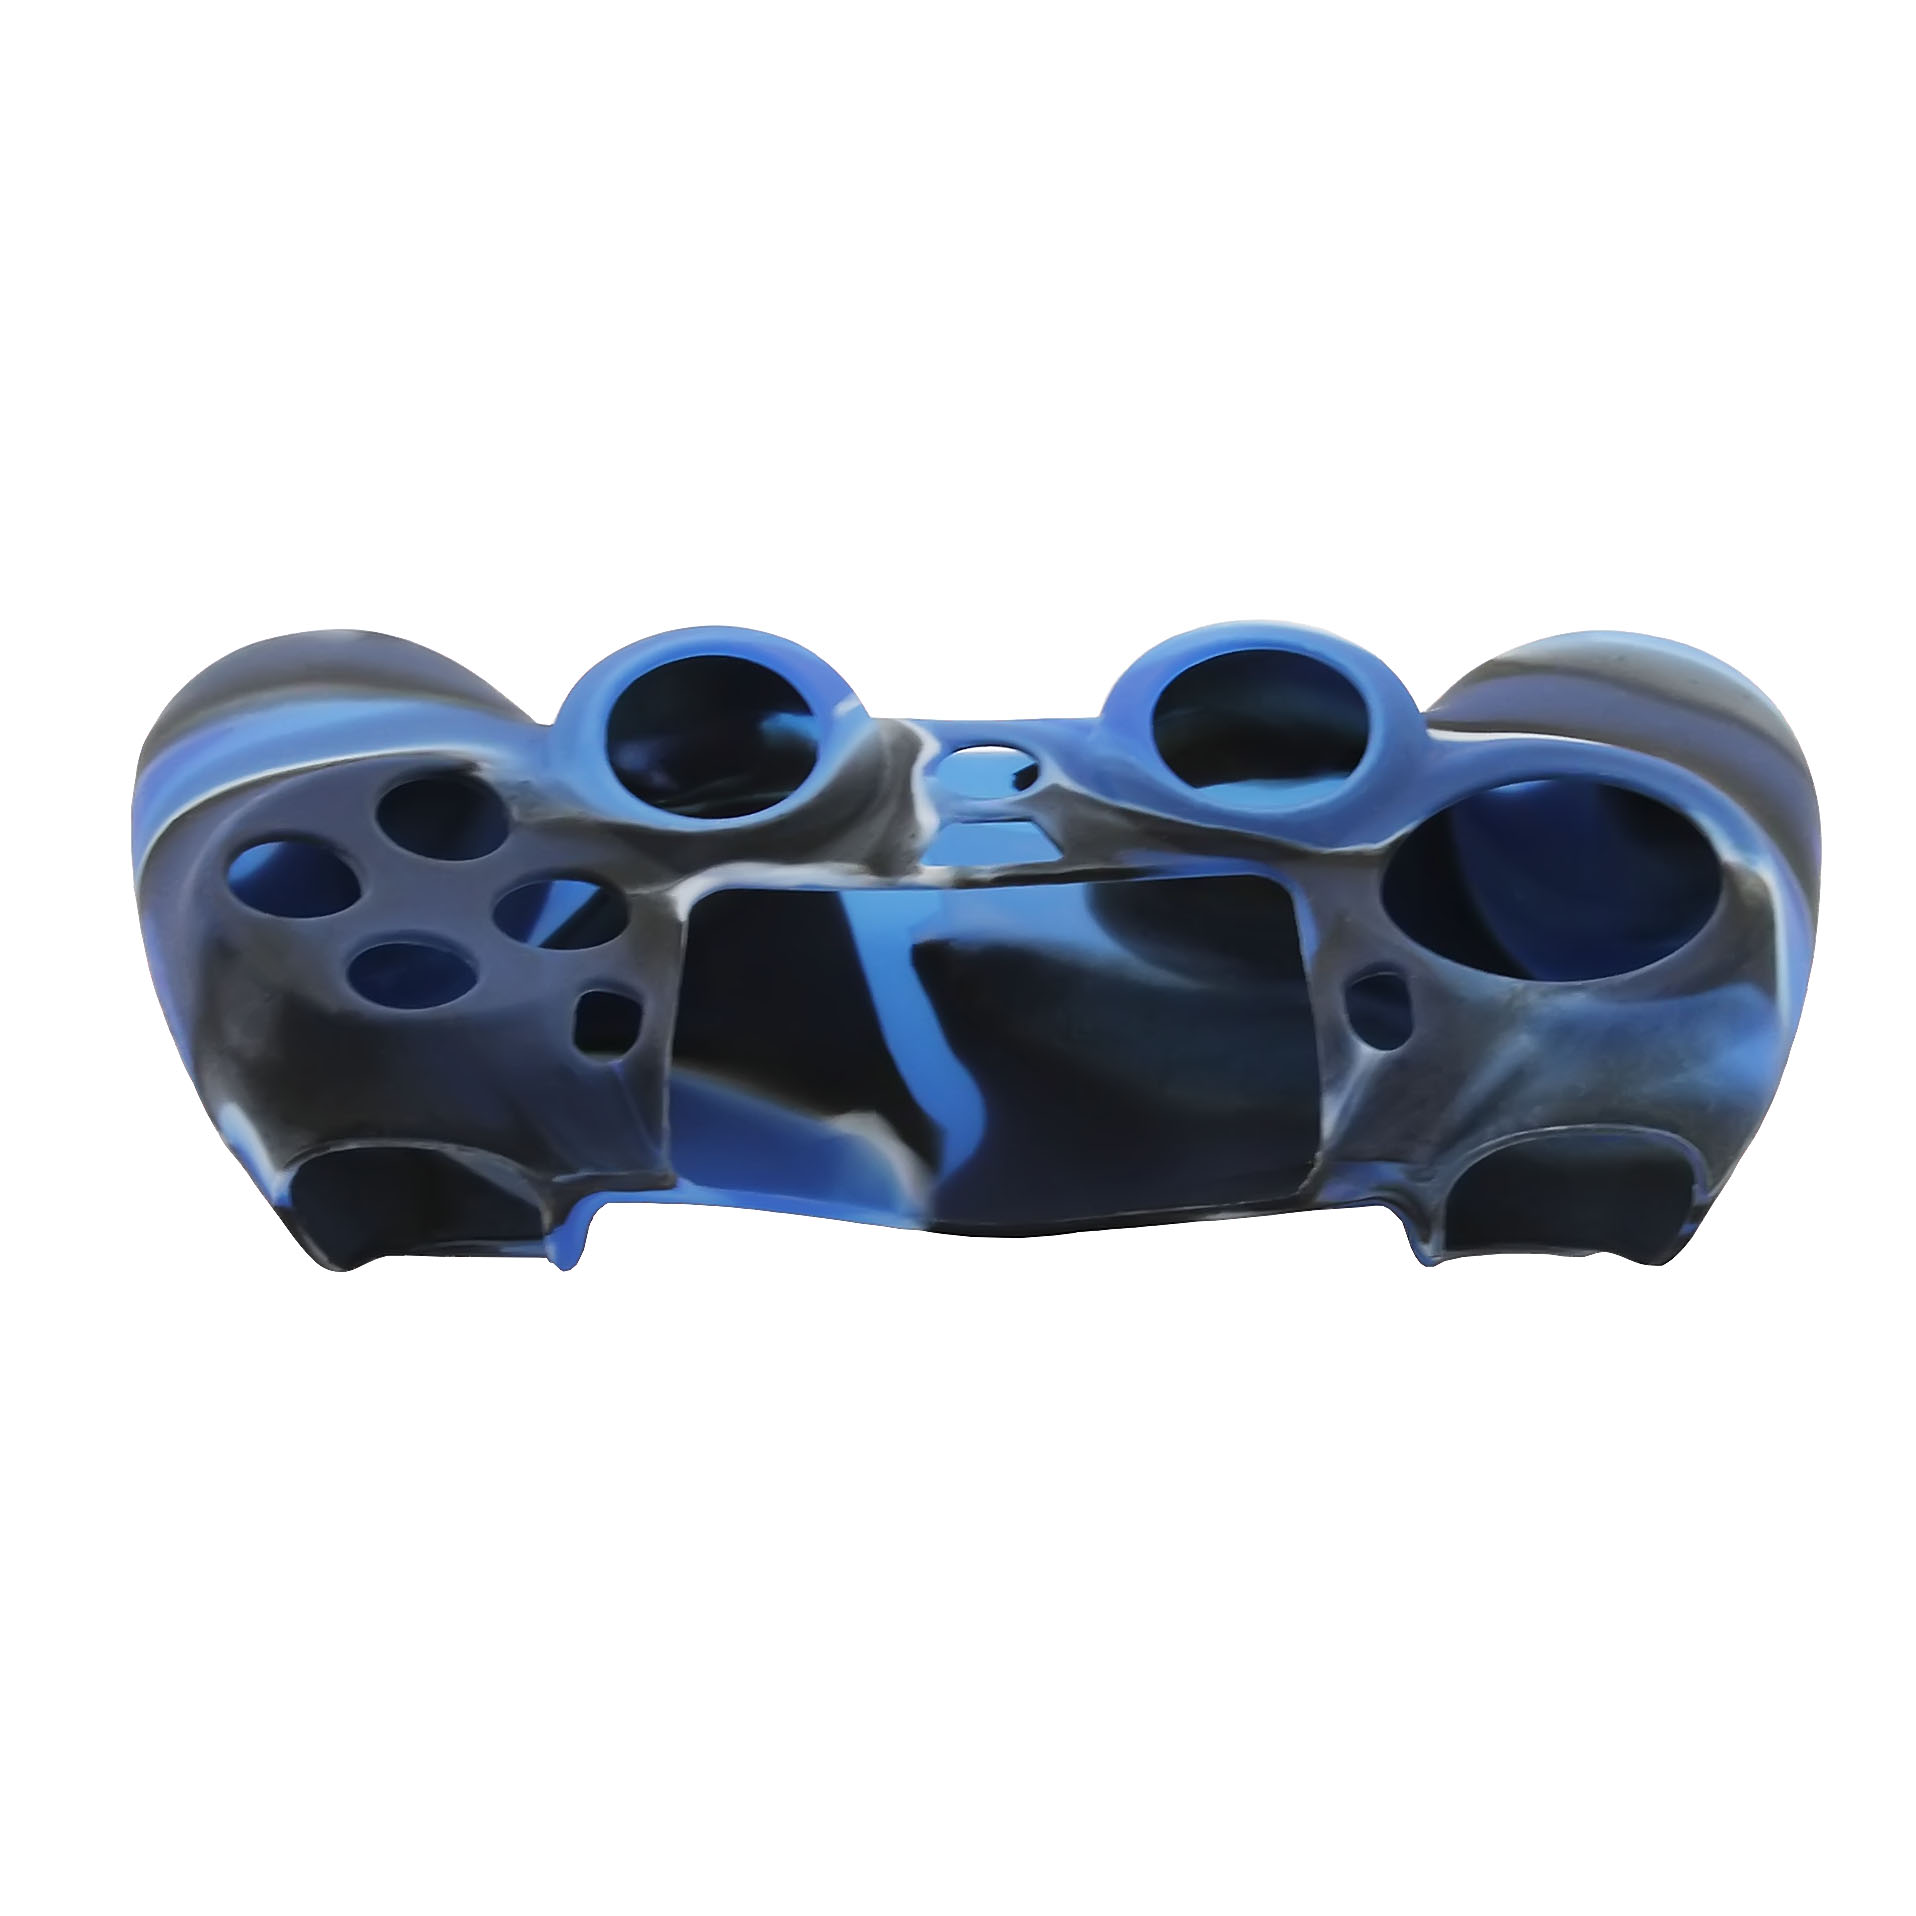 PS4 handle silicone sleeve camouflage pattern